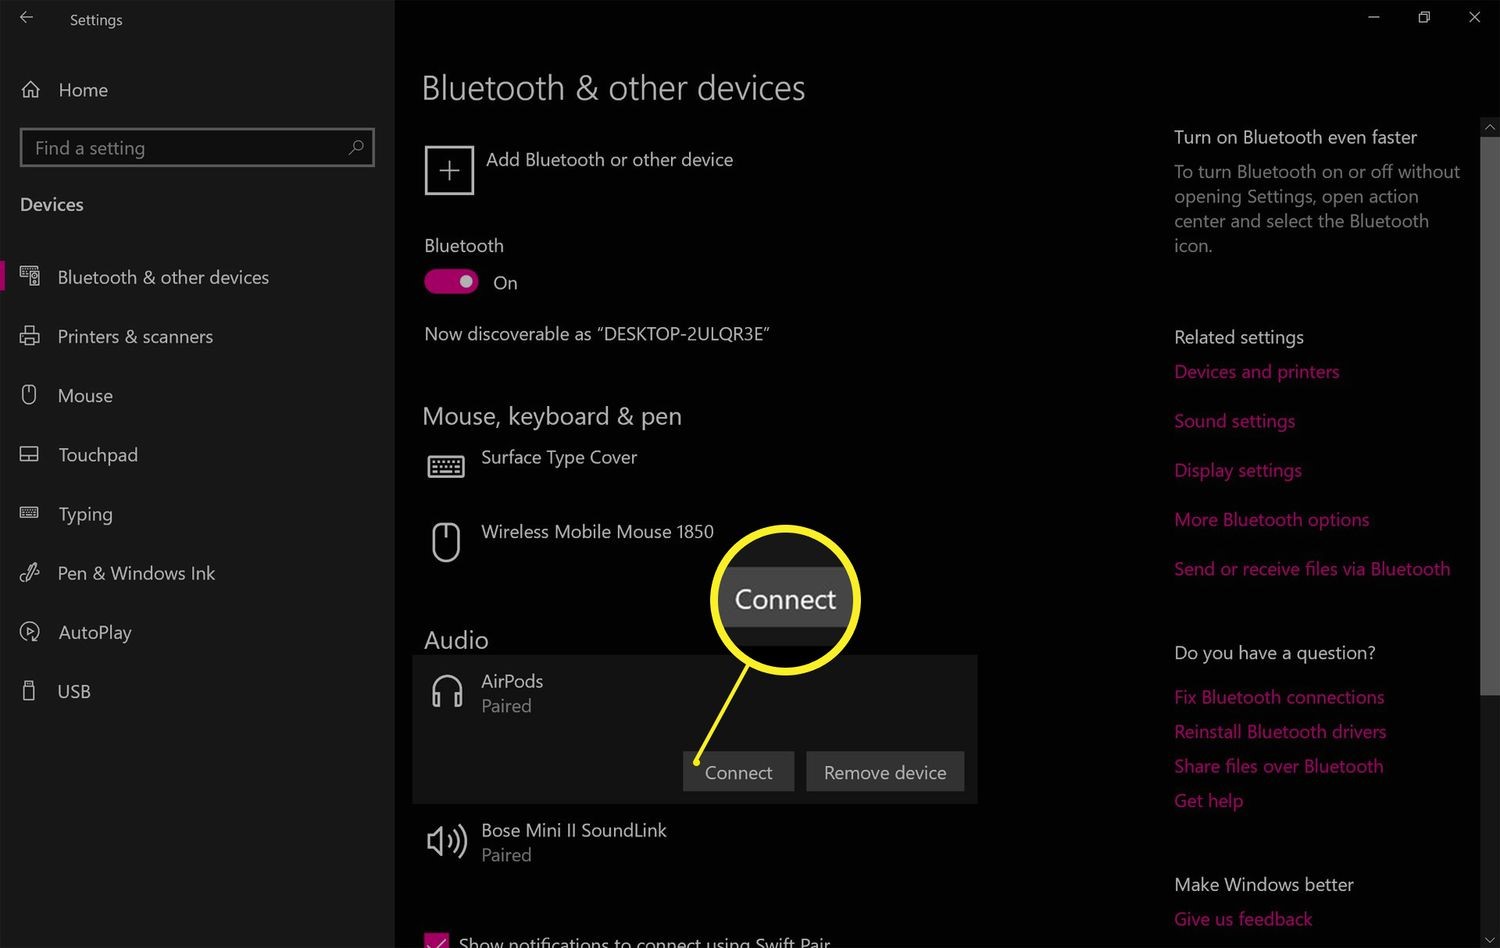 How to connect AirPods to Windows 10?